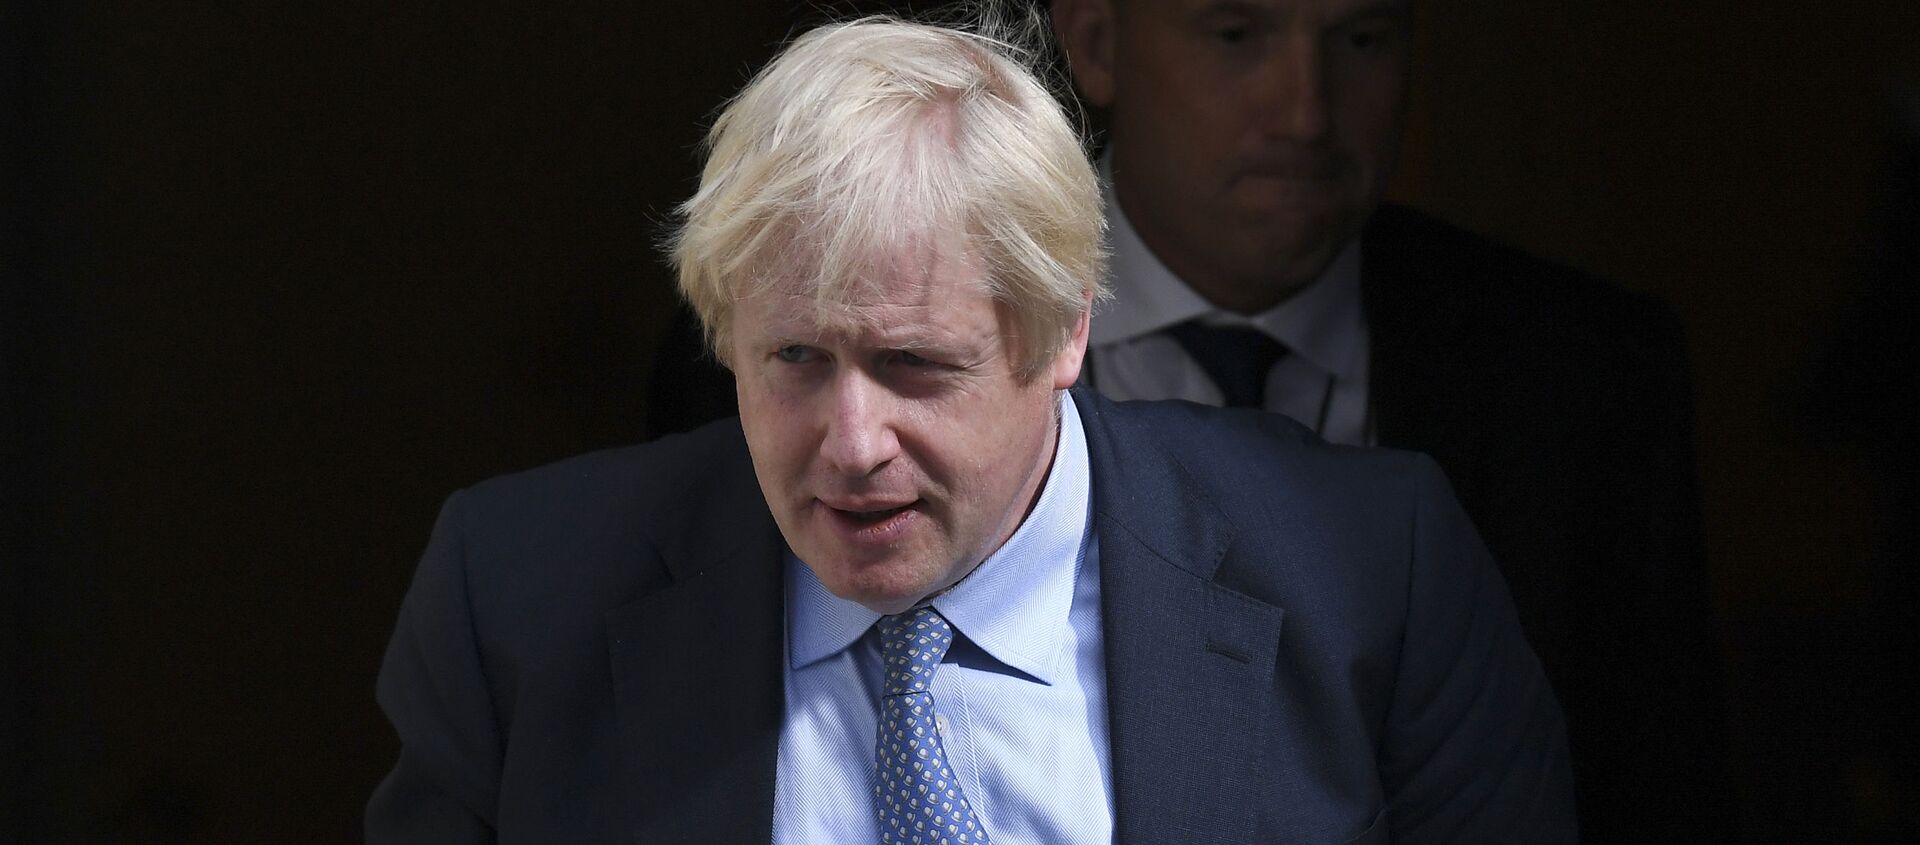 Britain's Prime Minister Boris Johnson leaves 10 Downing Street, London, for the House of Commons to attend the weekly Prime Minister's question time,  4 September 2019 - Sputnik International, 1920, 02.11.2019